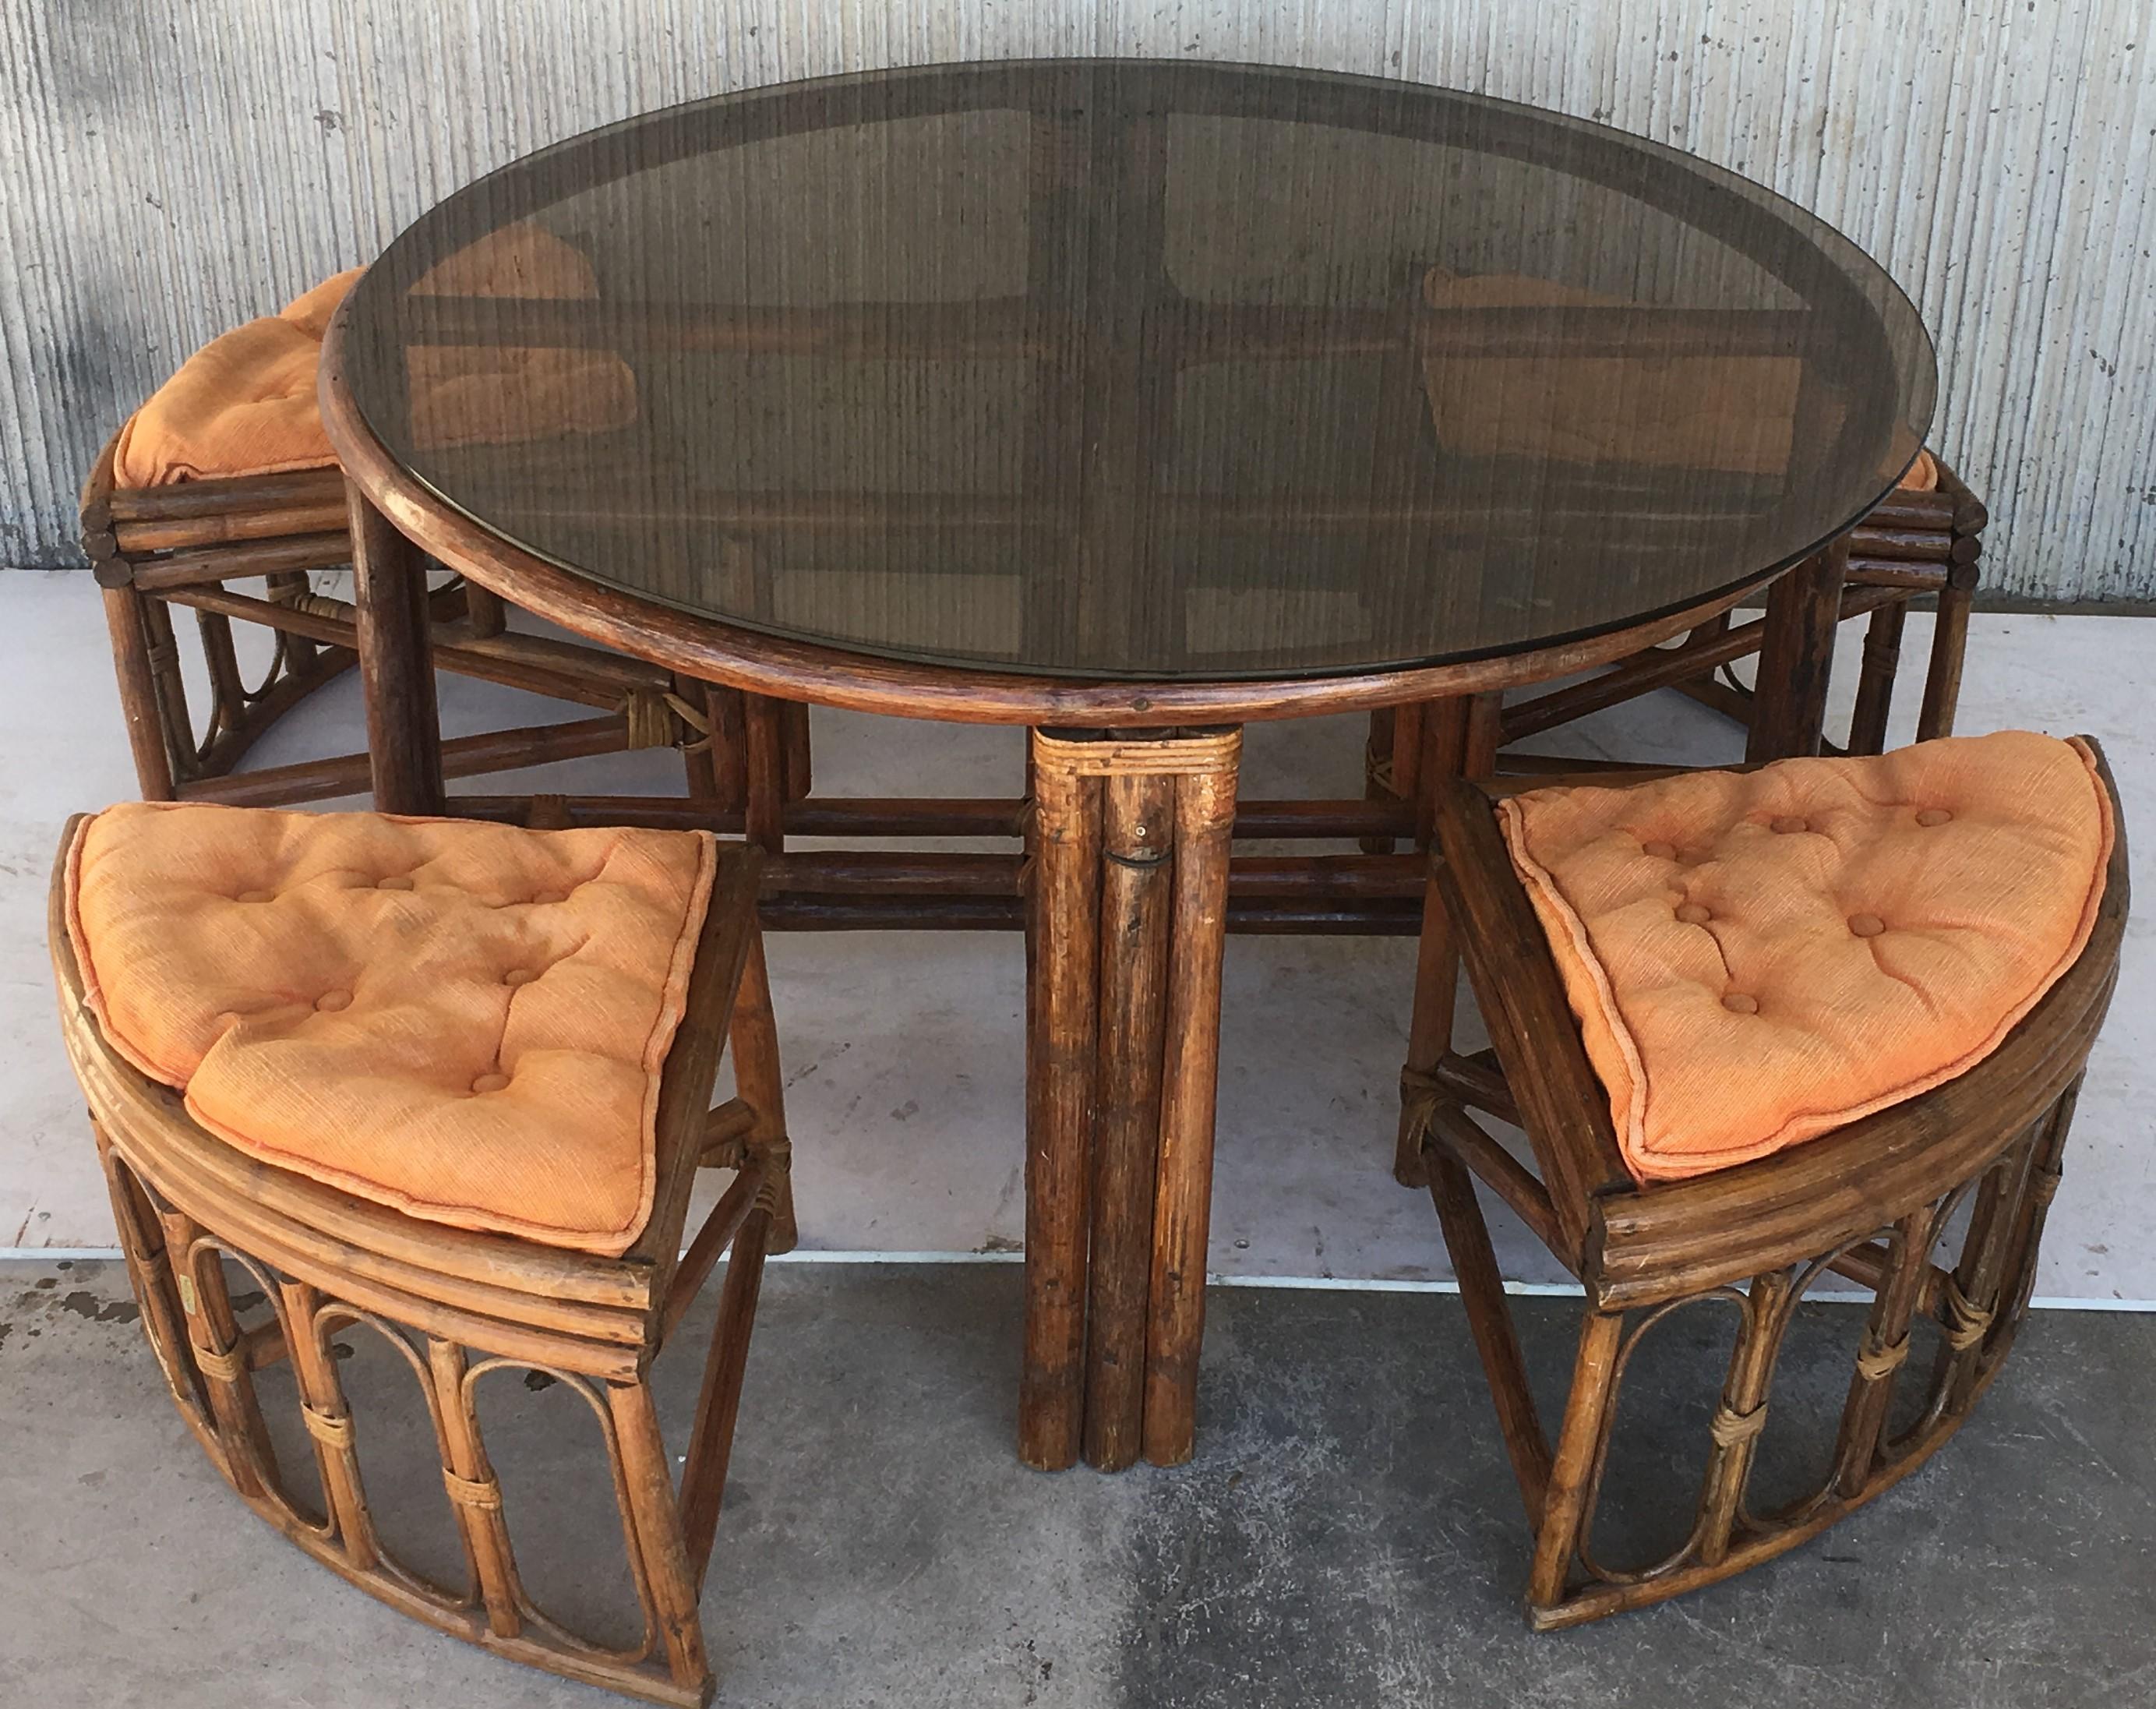 North American Vintage Round McGuire Style Bamboo and Glass Dining Table with Four Stools